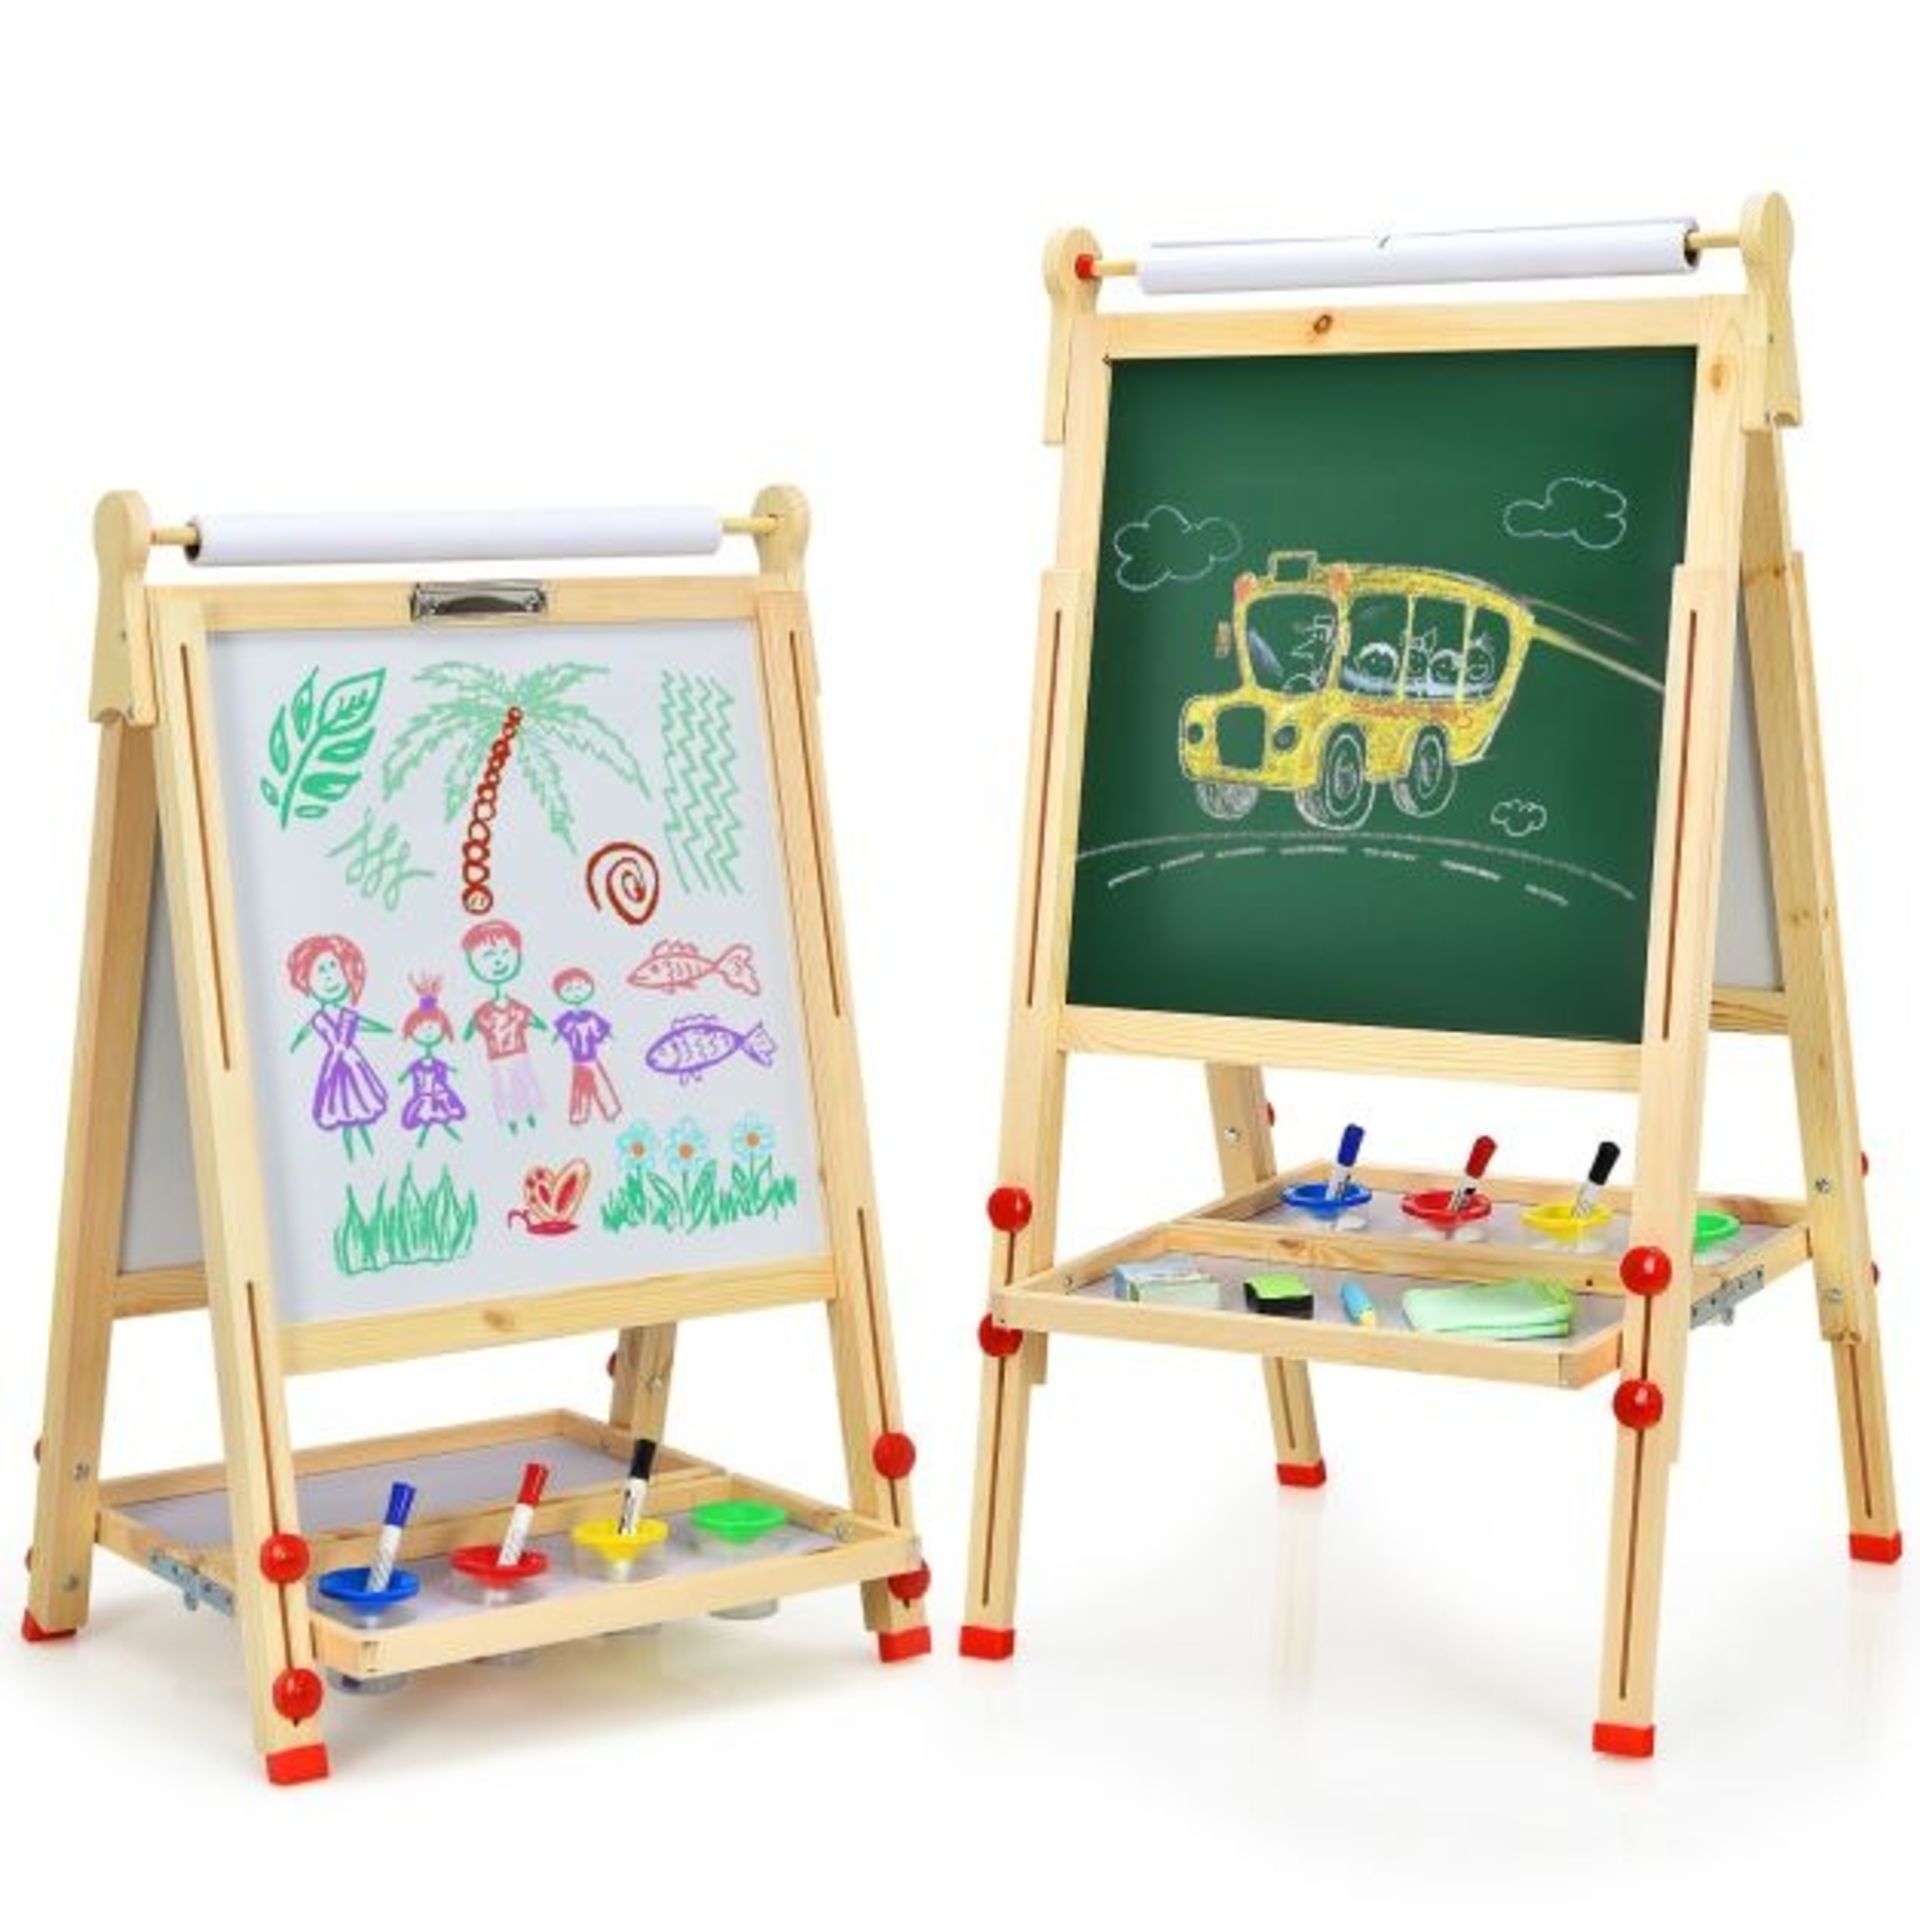 3-in-1 Double-Sided Kid’s Art Easel with Whiteboard - ER54